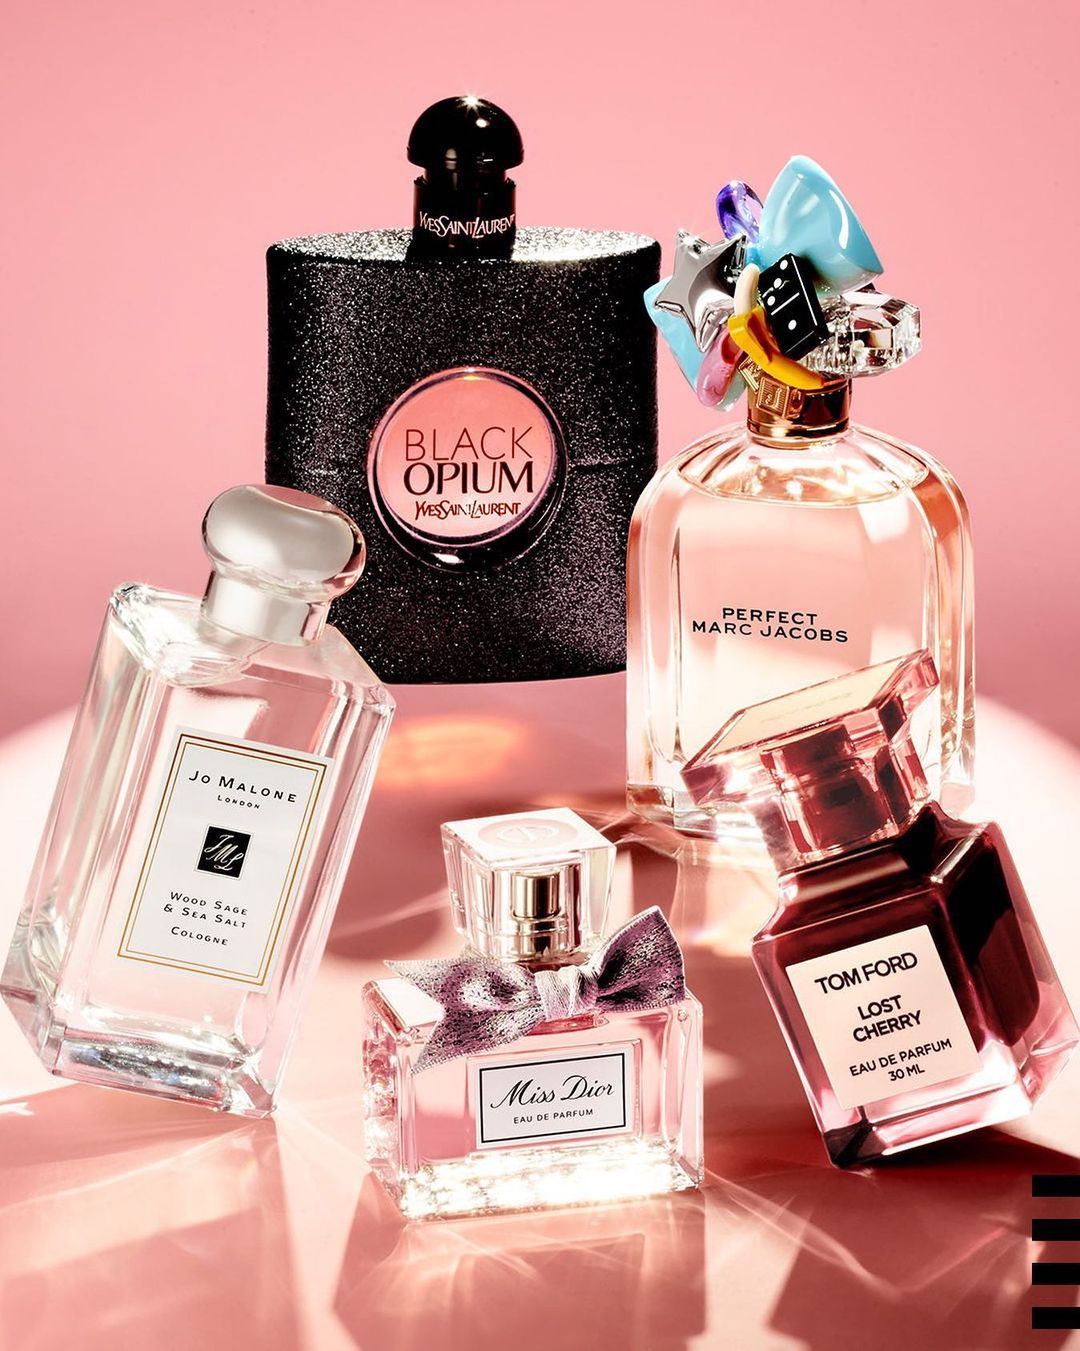 The 5 Best-Selling Scents From Sephora You Should Buy Right Now